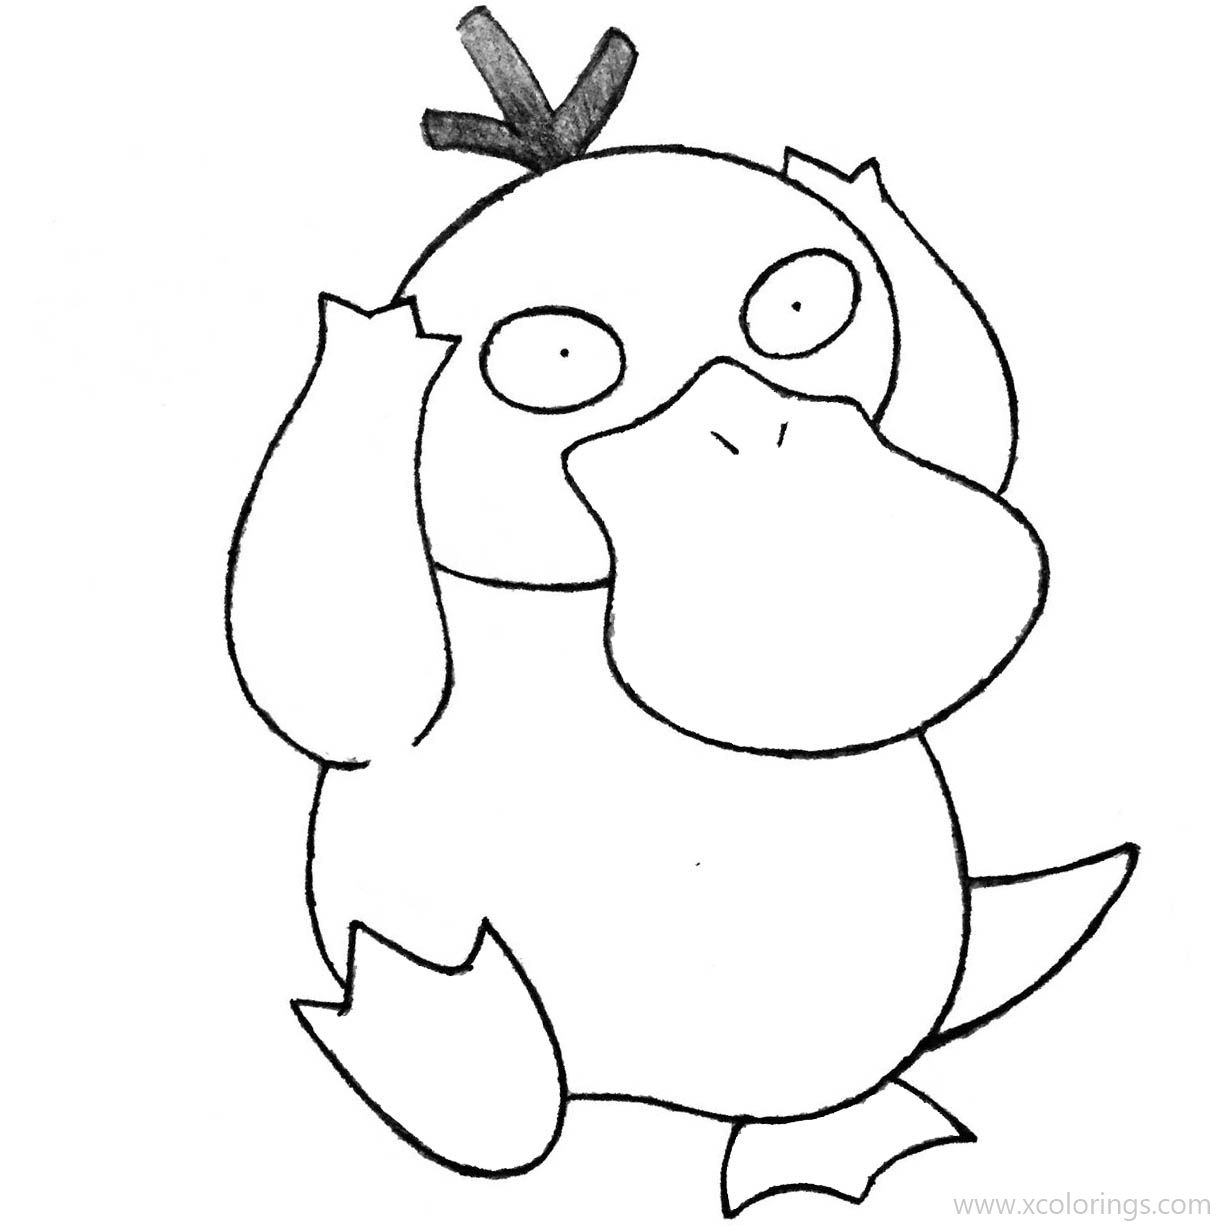 Free Psyduck Pokemon Coloring Pages Line Art by drawingsbysumeet printable